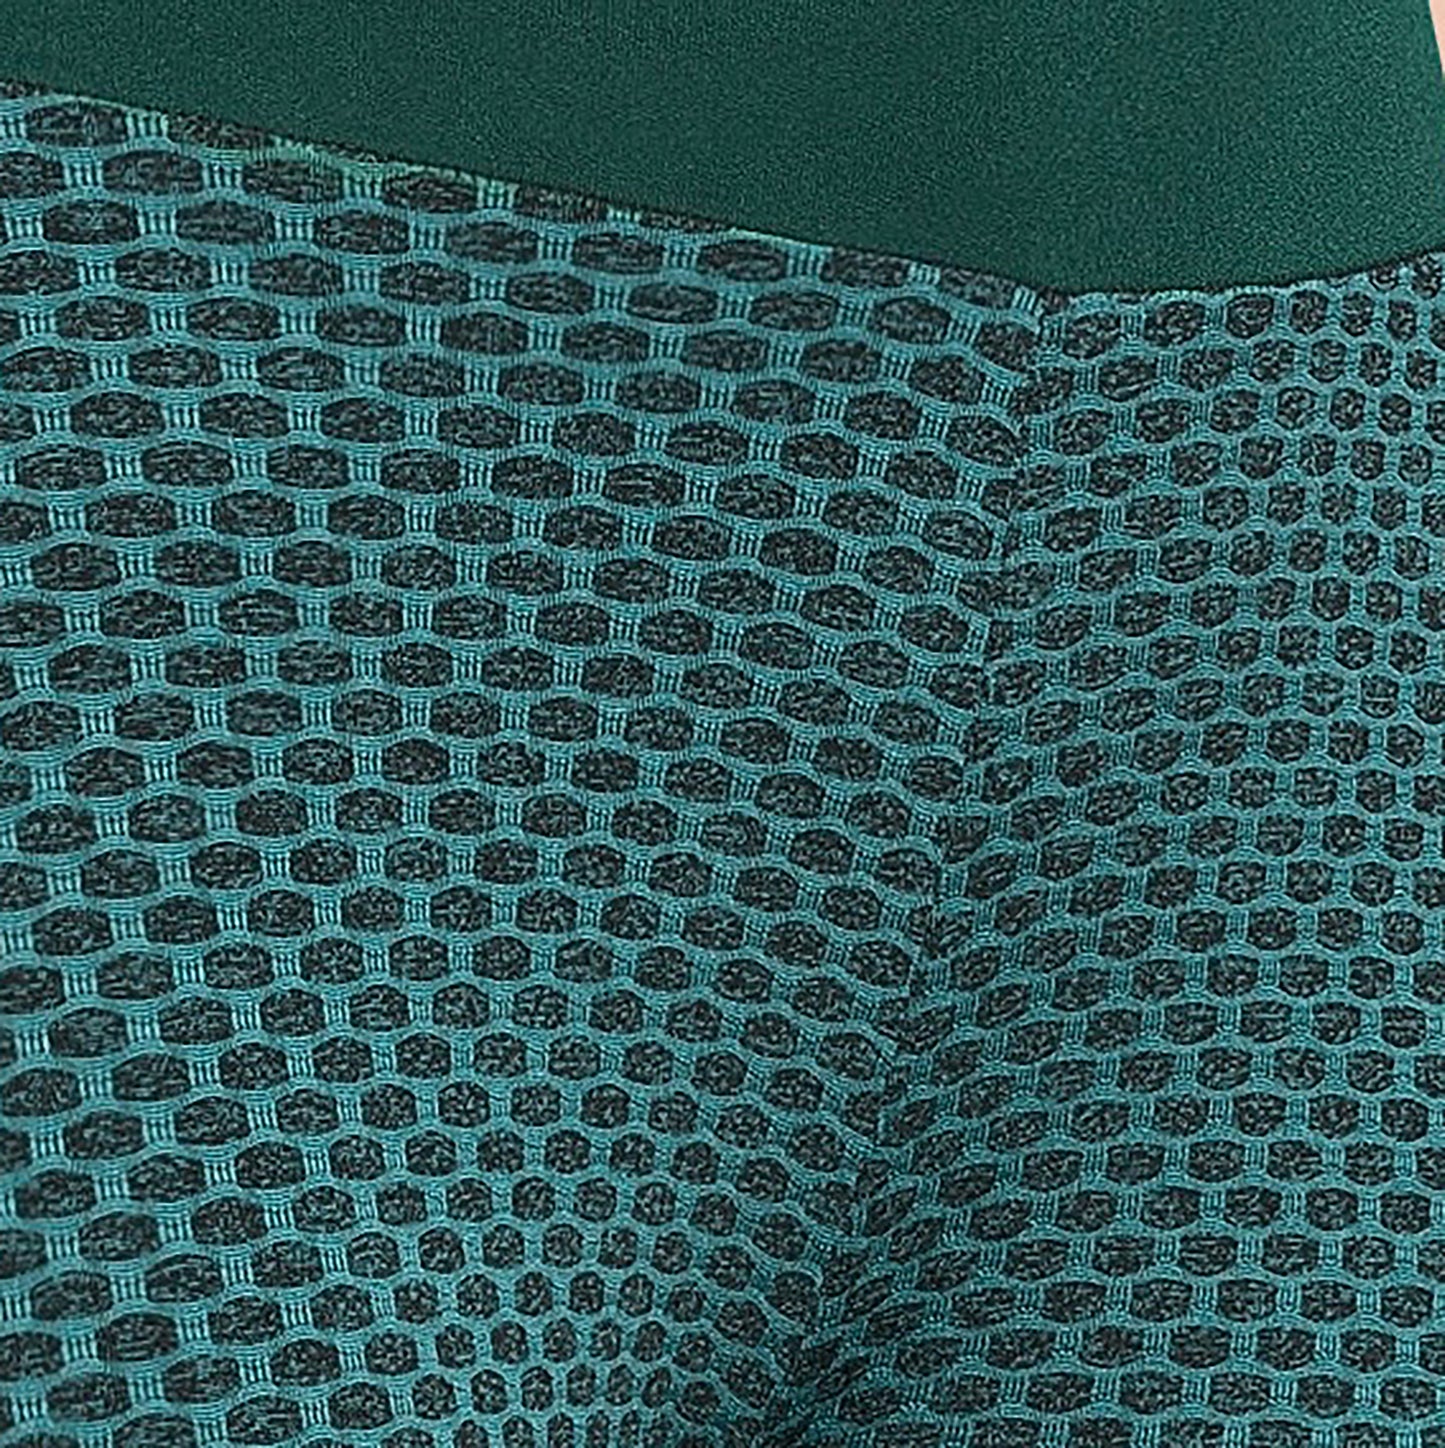 SOBEYO Legging Solid High Waisted Bubble Stretchable FabricTeal